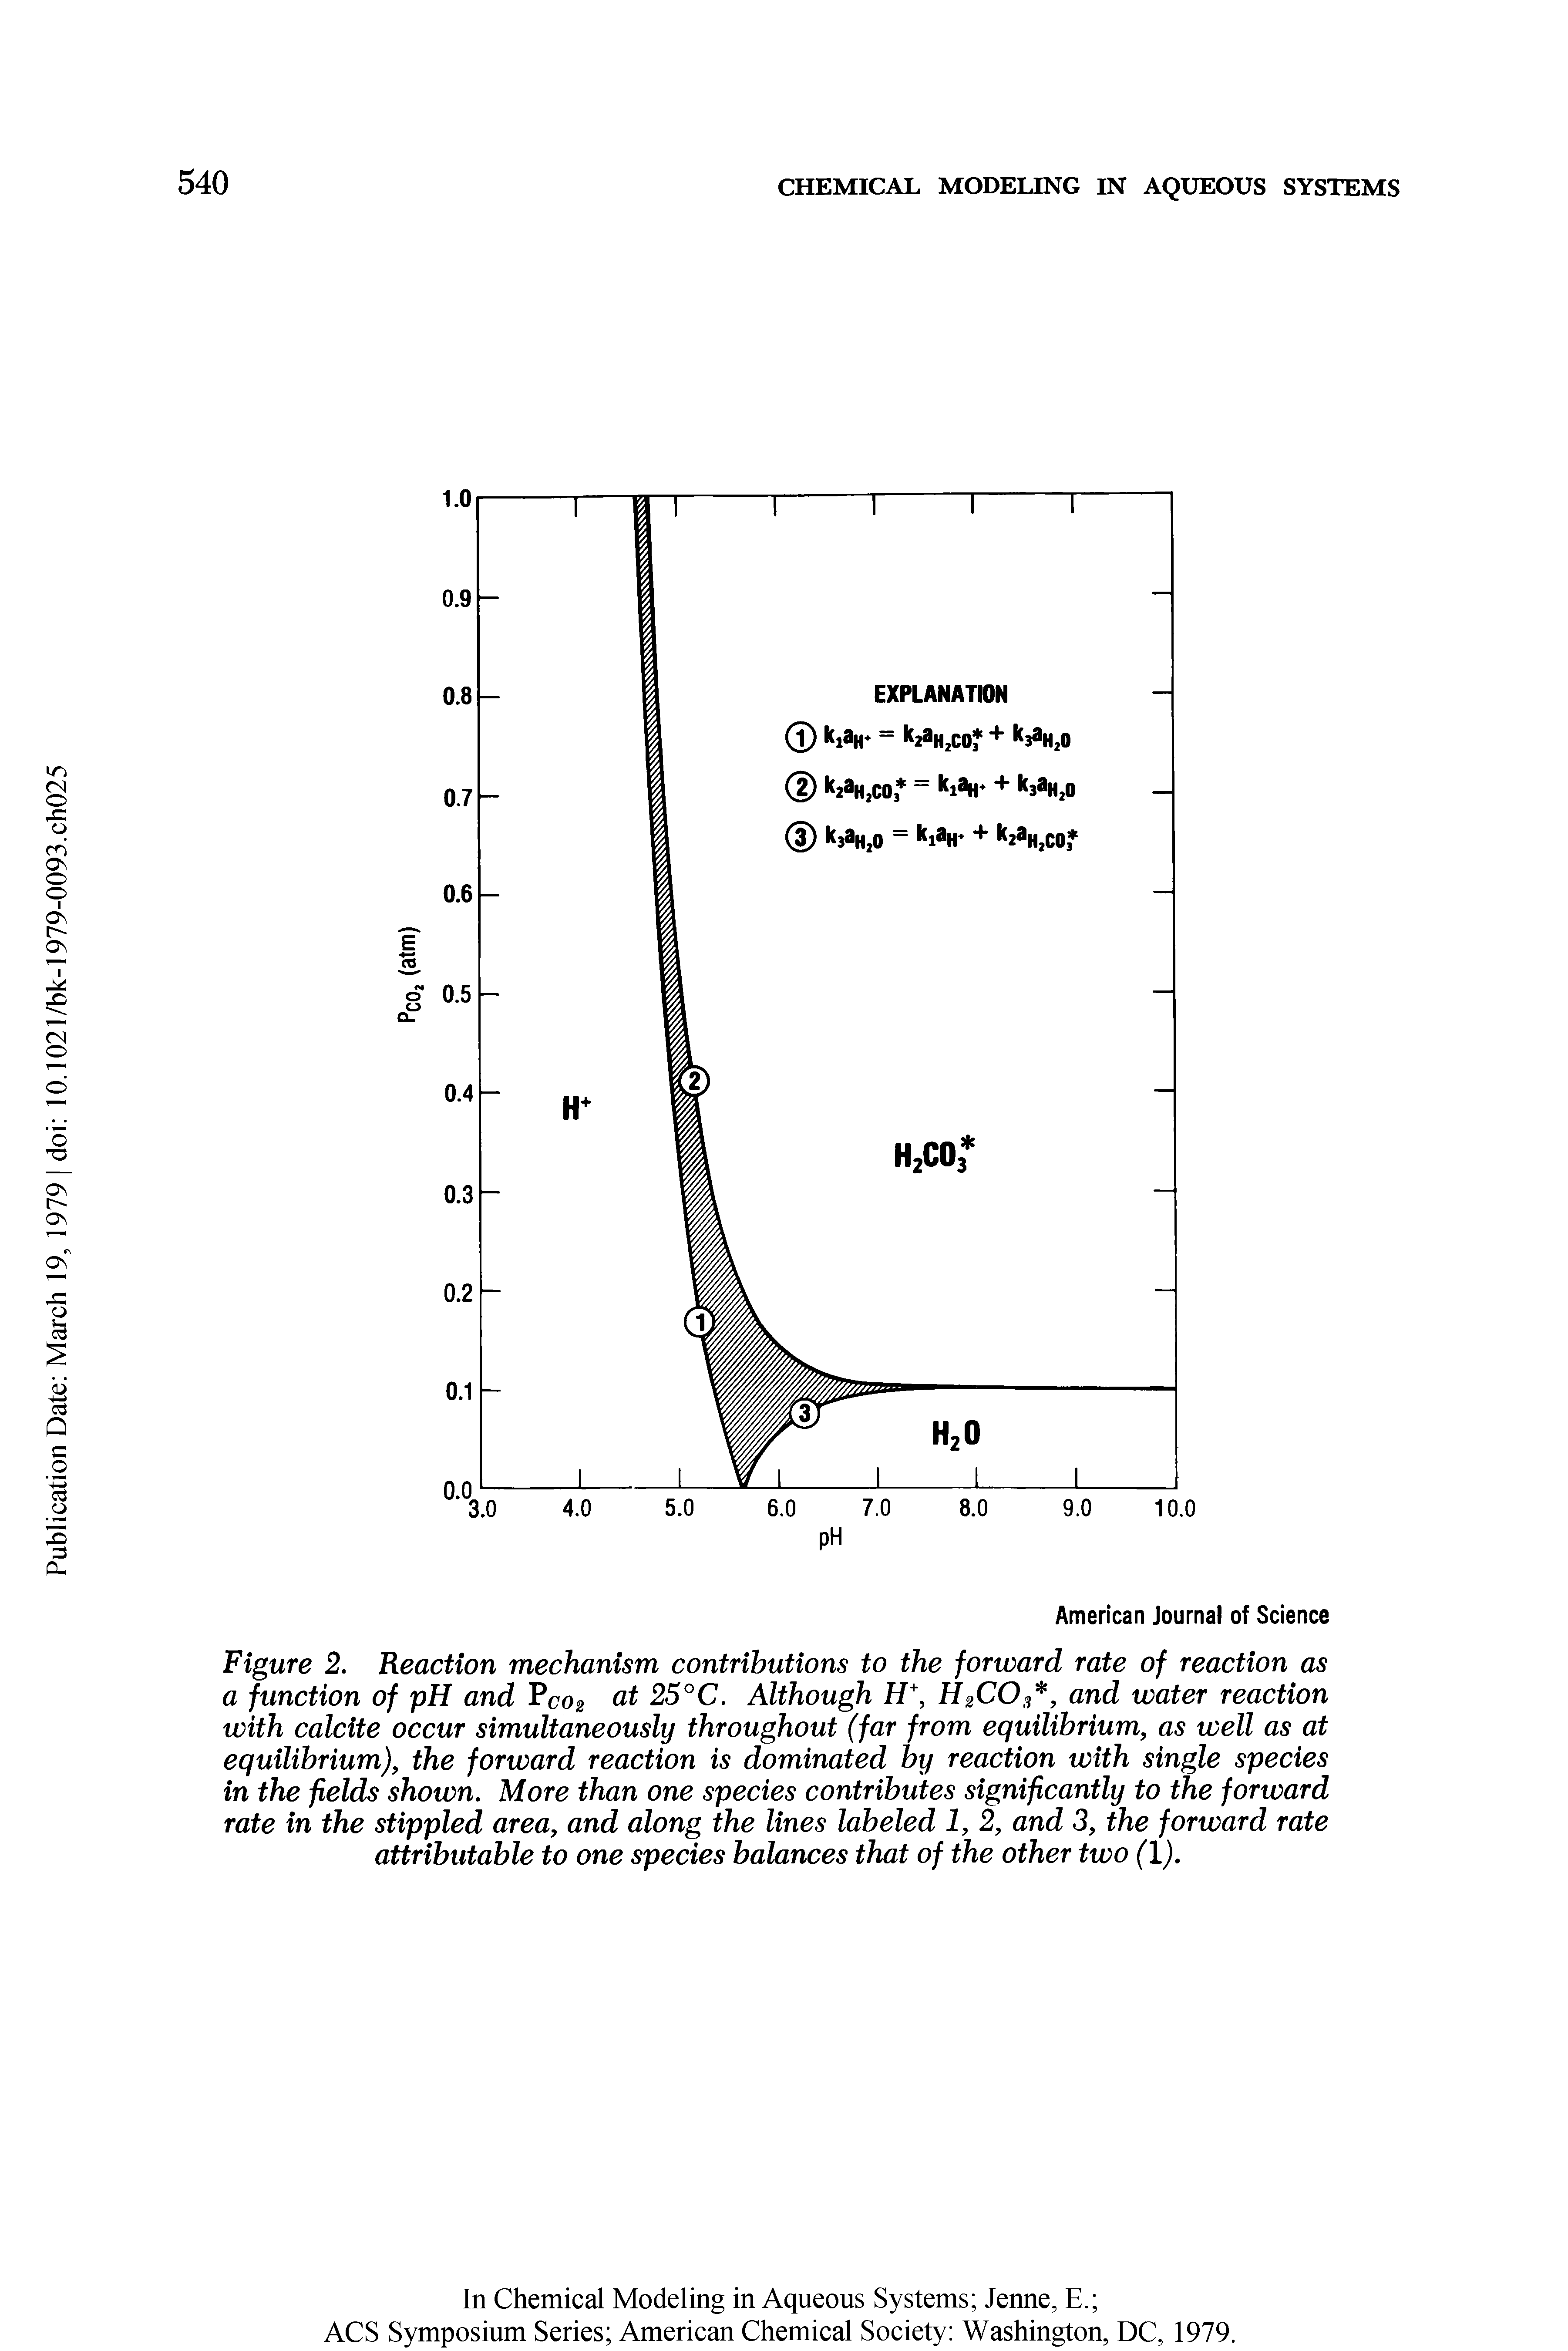 Figure 2. Reaction mechanism contributions to the forward rate of reaction as a function of pH and at 25°C. Although H2COS, and water reaction with calcite occur simultaneously throughout (far from equilibrium, as well as at equilibrium), the forward reaction is dominated by reaction with single species in the fields shown. More than one species contributes significantly to the forward rate in the stippled area, and along the lines labeled 1, 2, and 3, the forward rate attributable to one species balances that of the other two (1).